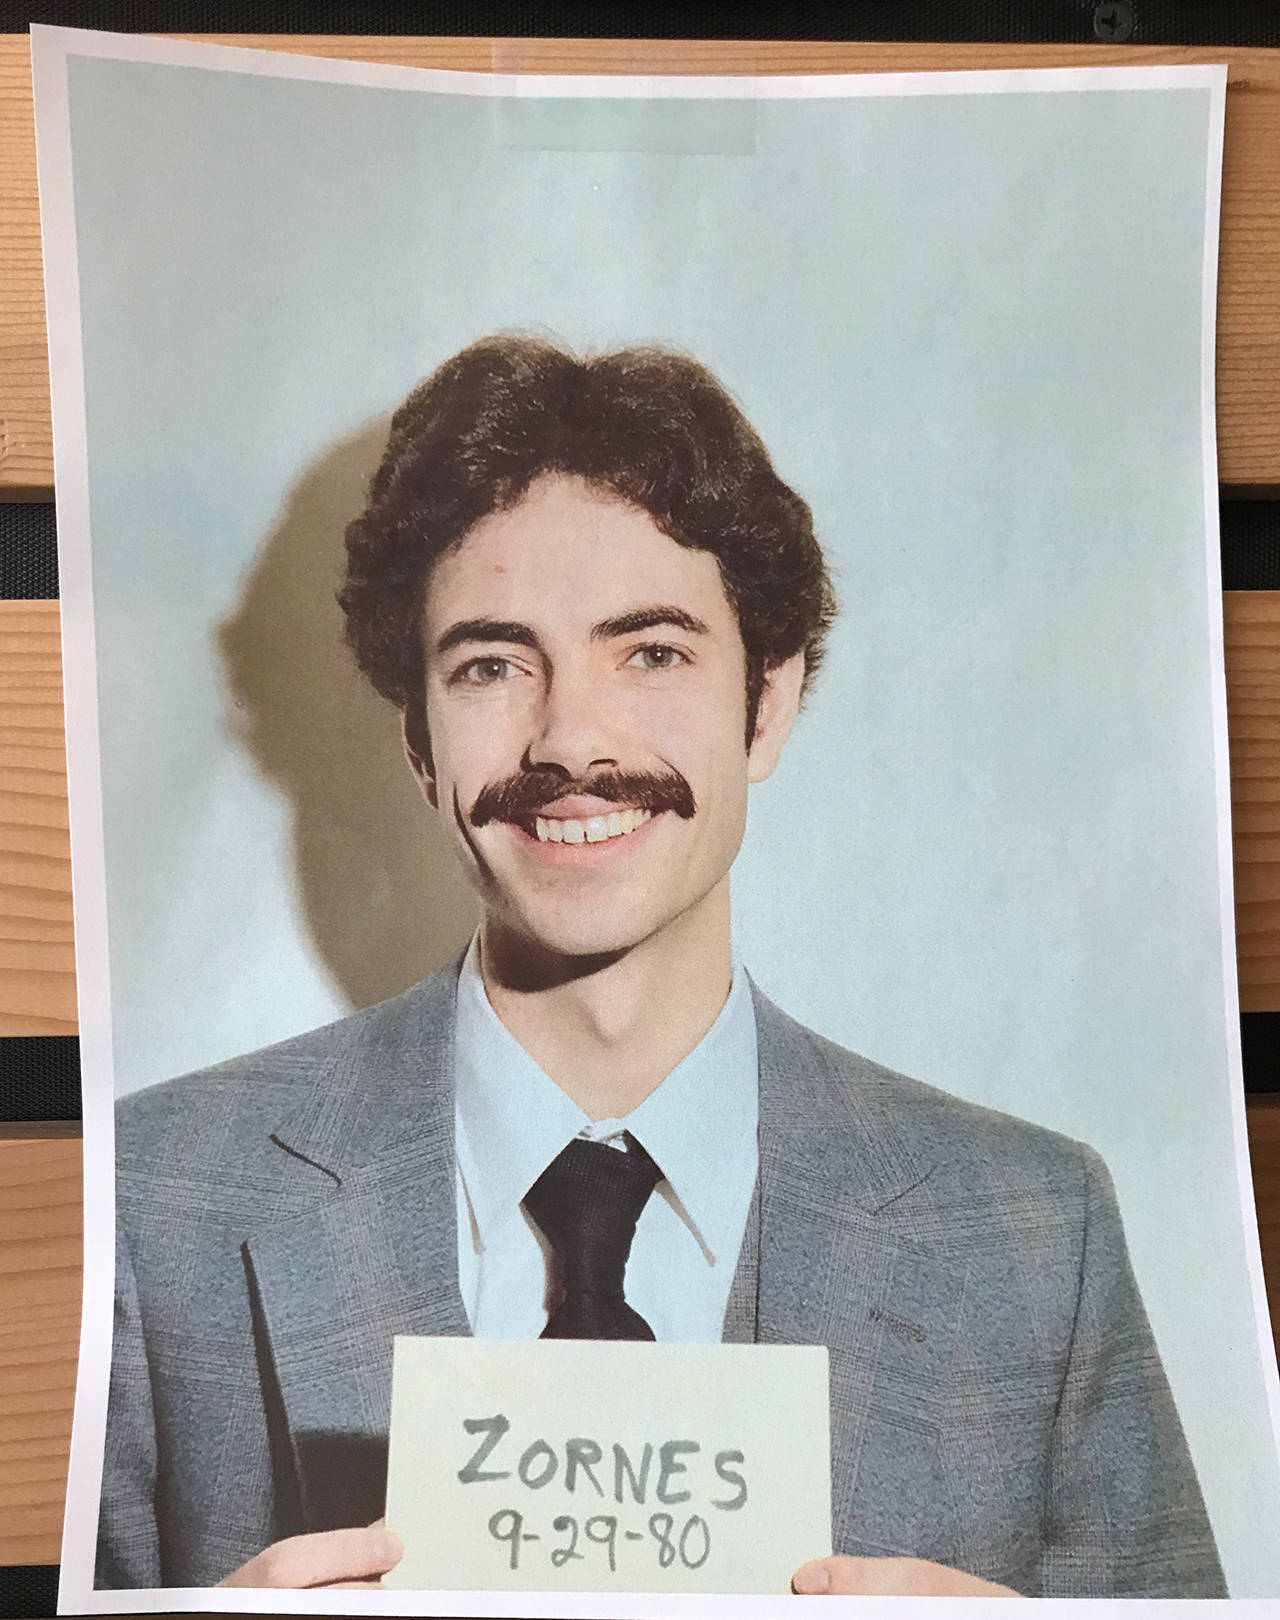 Dwight (Sherlock) Holmes gave retiring deputy Gary Zornes the nickname “Bones” when he joined the King County Sheriff’s office because “he was so skinny.” Samantha Pak, Bothell/Kenmore Reporter